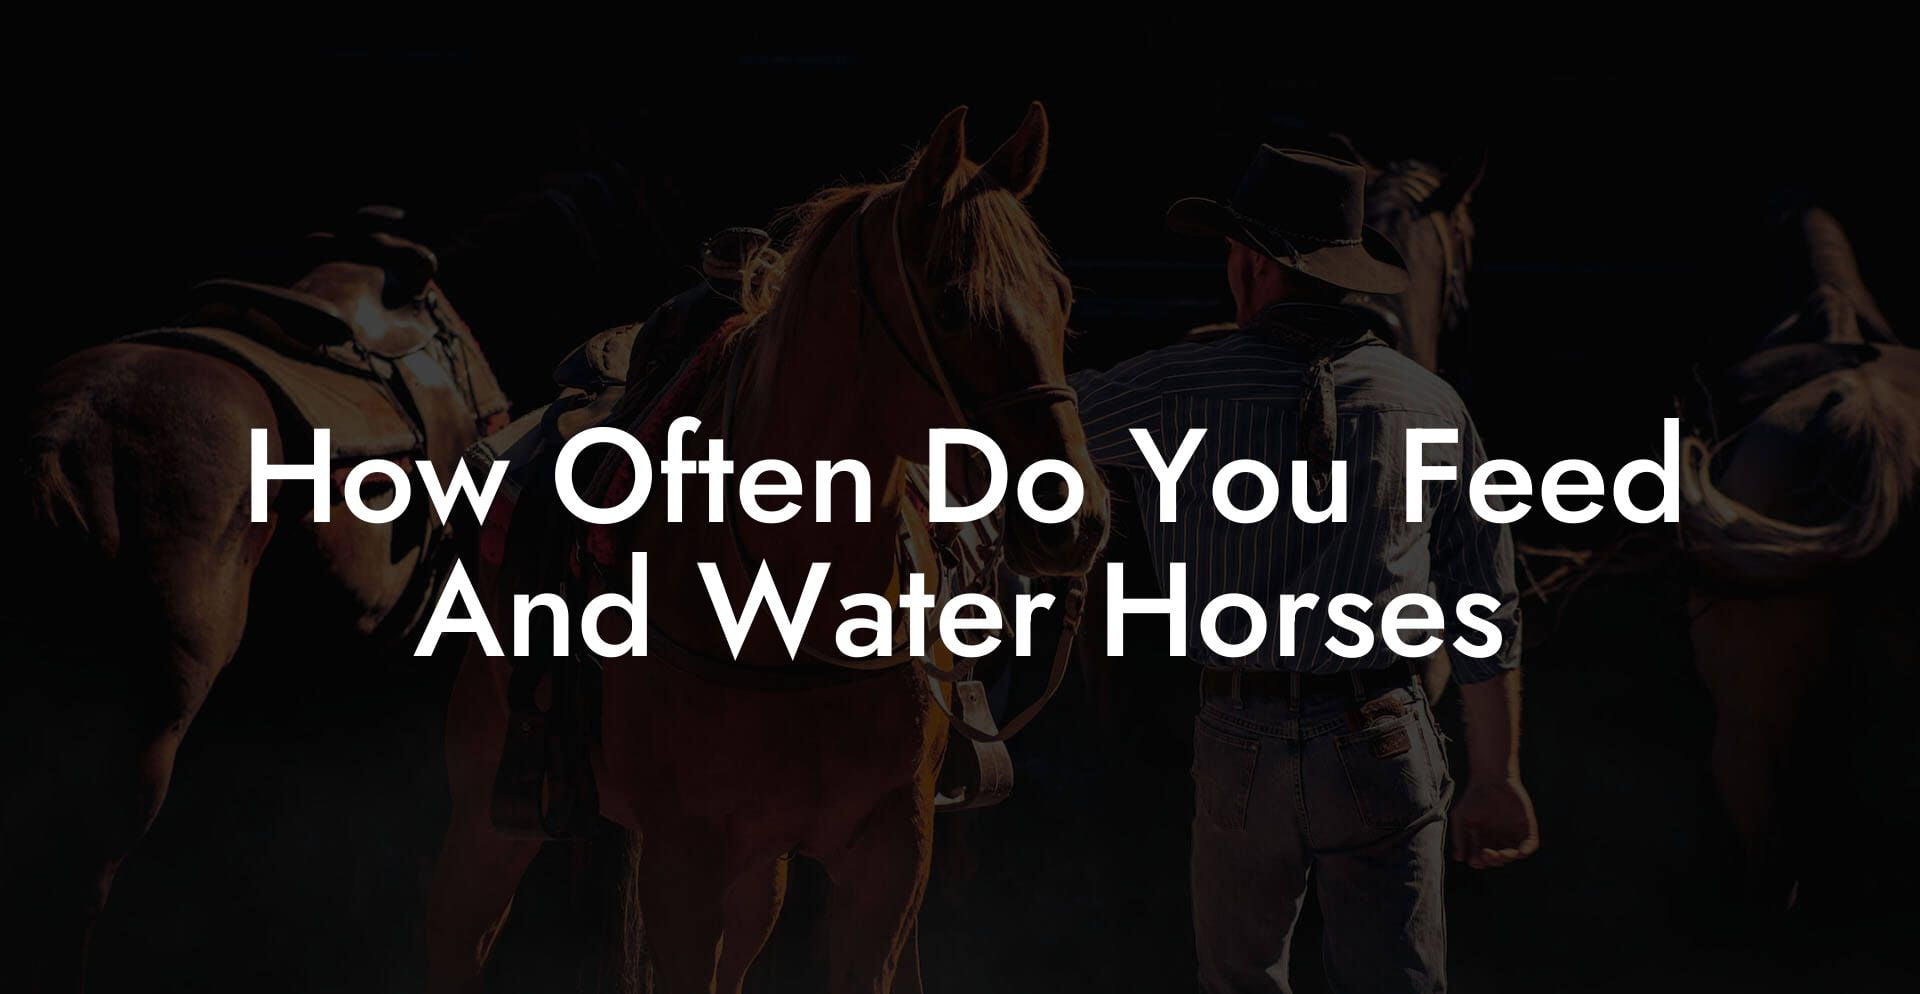 How Often Do You Feed And Water Horses